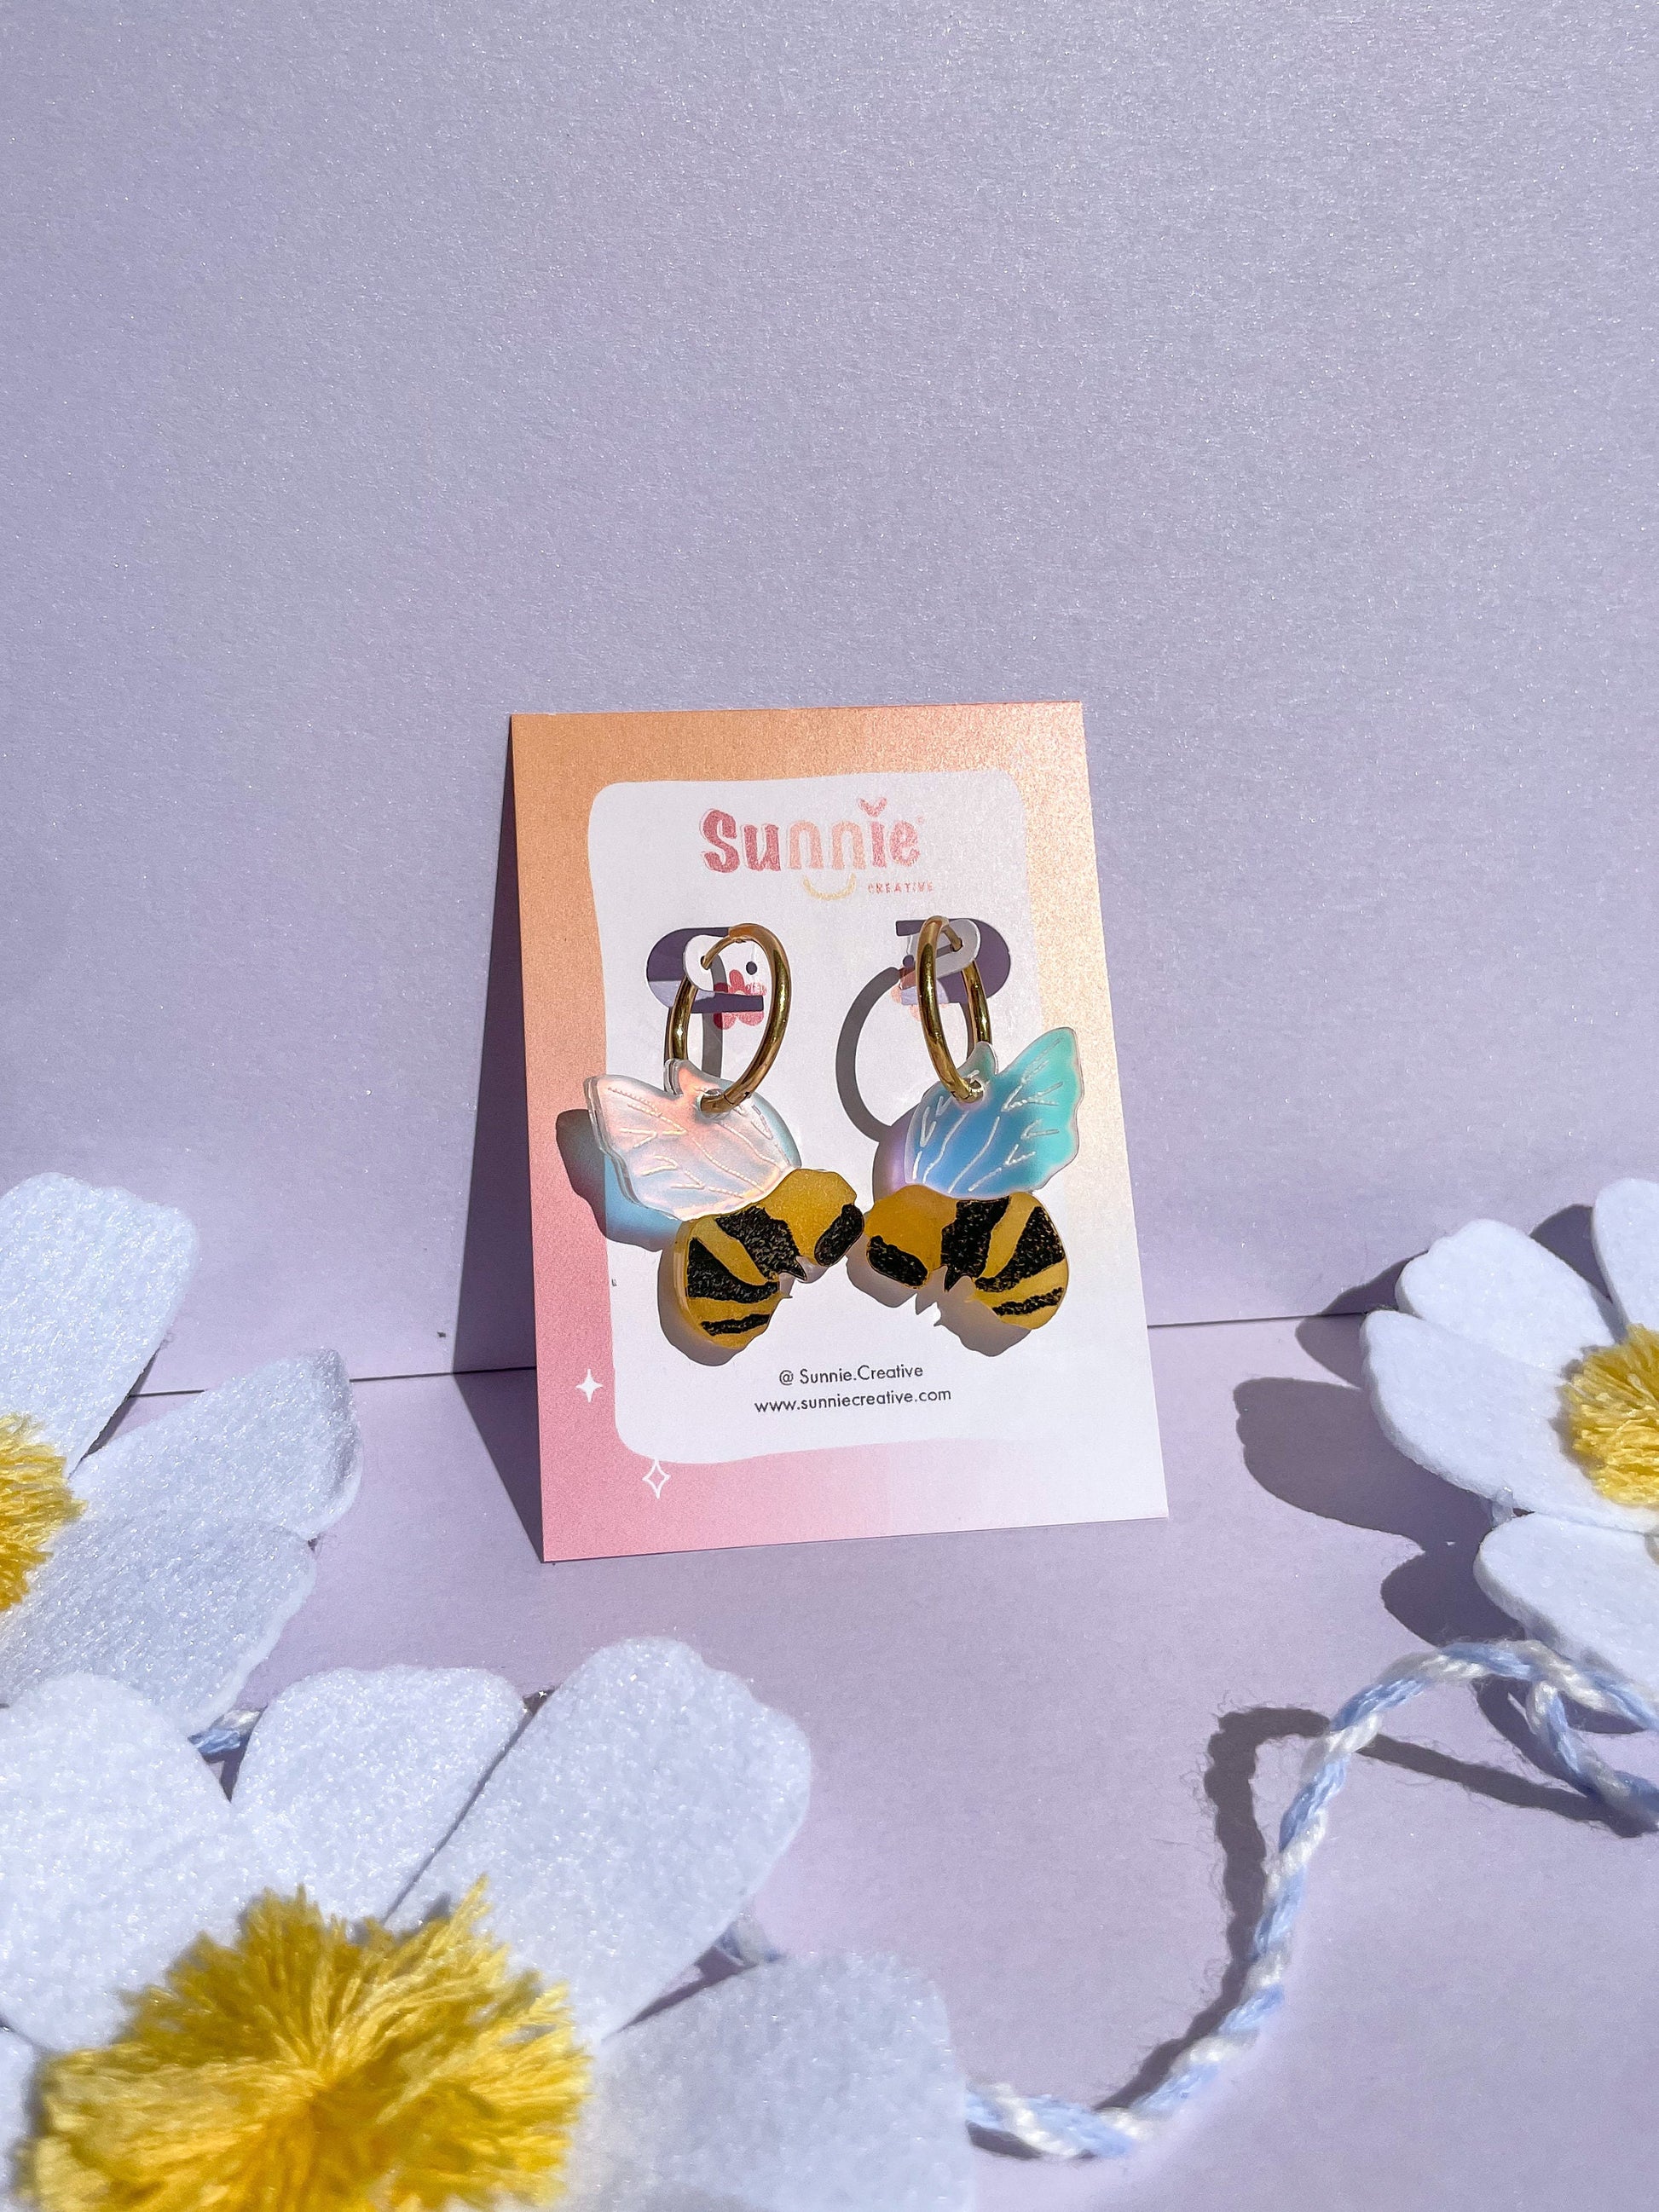 Bumble Bee Hoops//Spring Earring//Statement Earring//Acrylic Earring//Bee Earrings//Statement Hoop